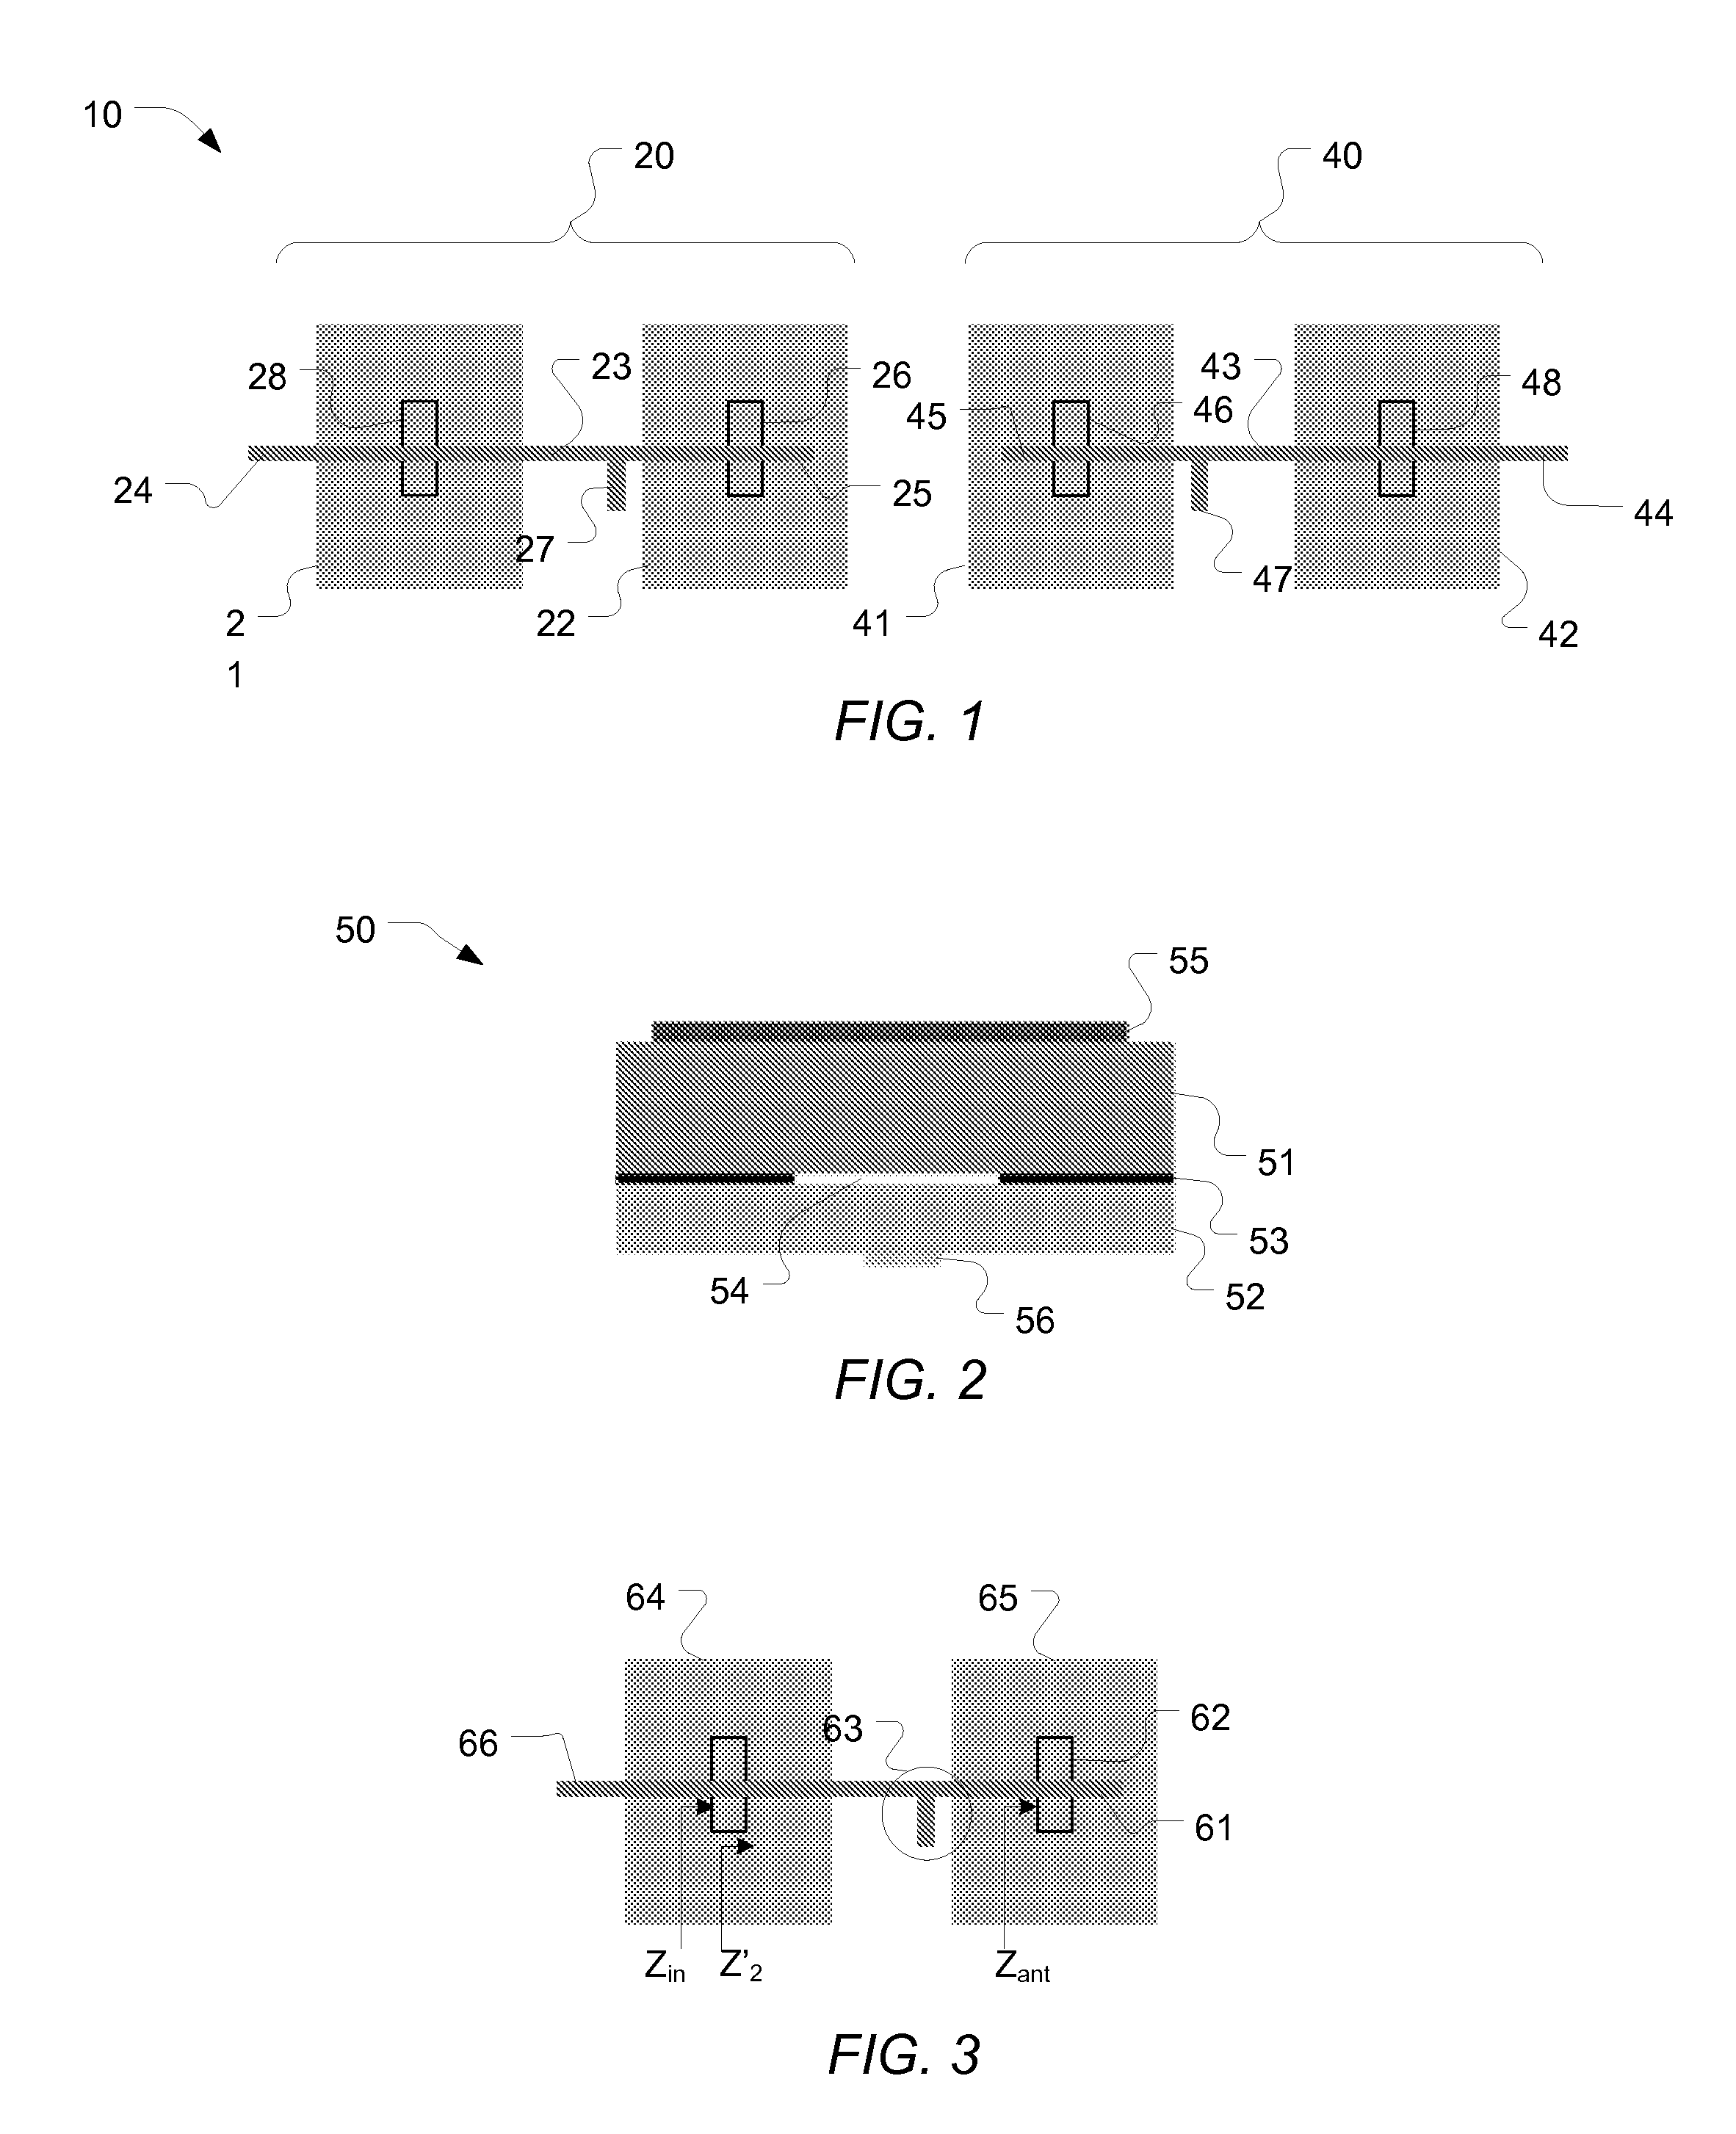 Dual-feed series microstrip patch array